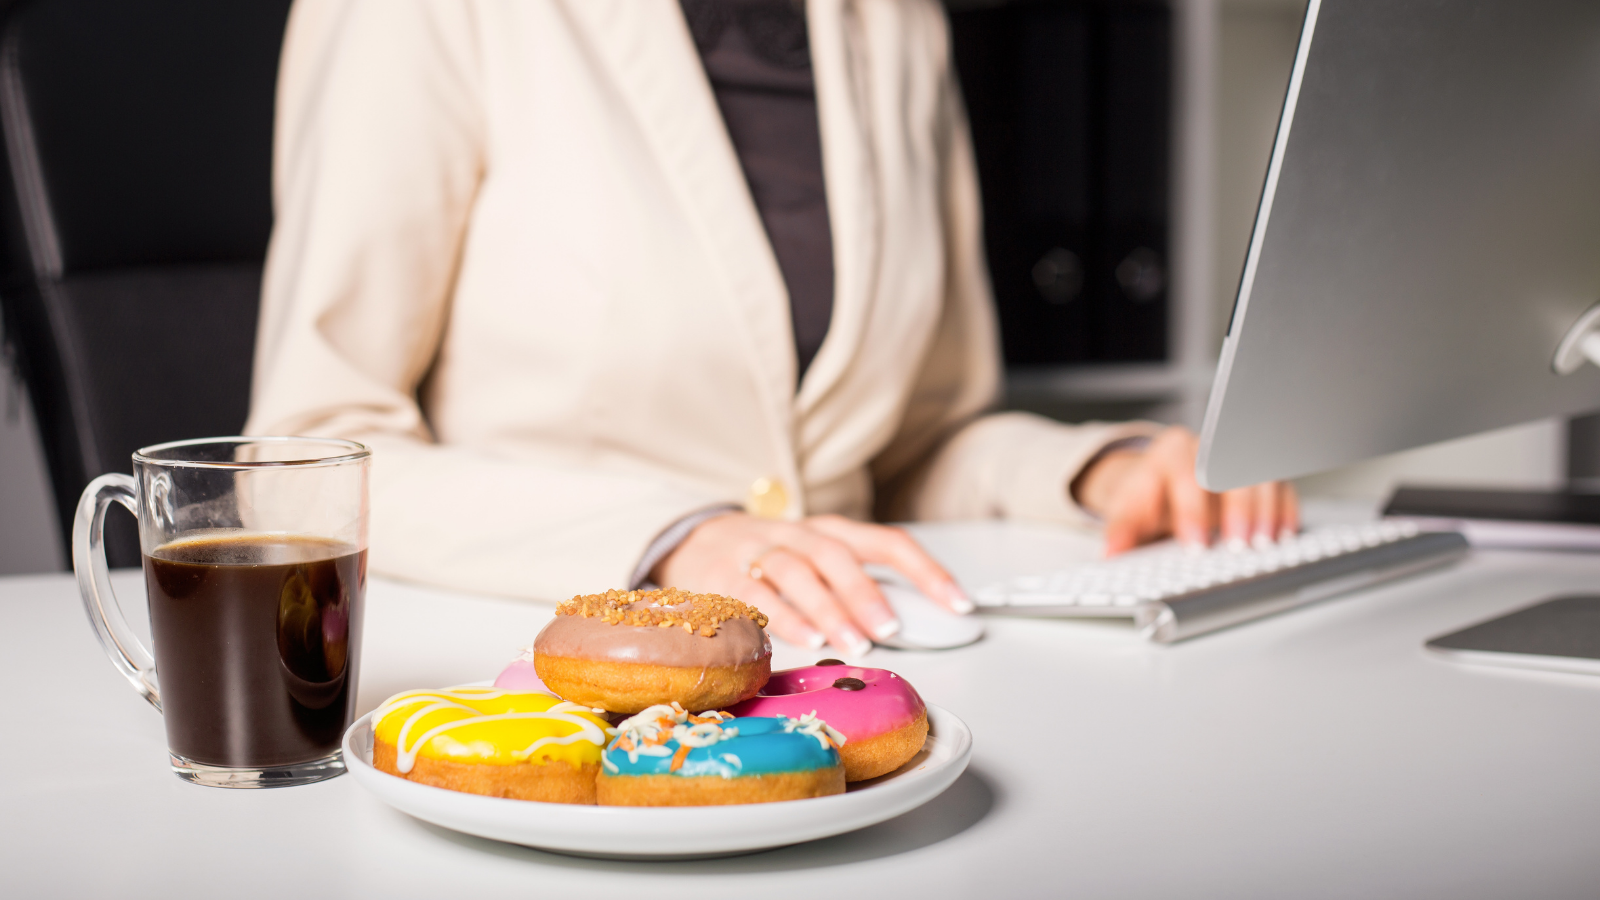 Woman having coffee and donuts at work.